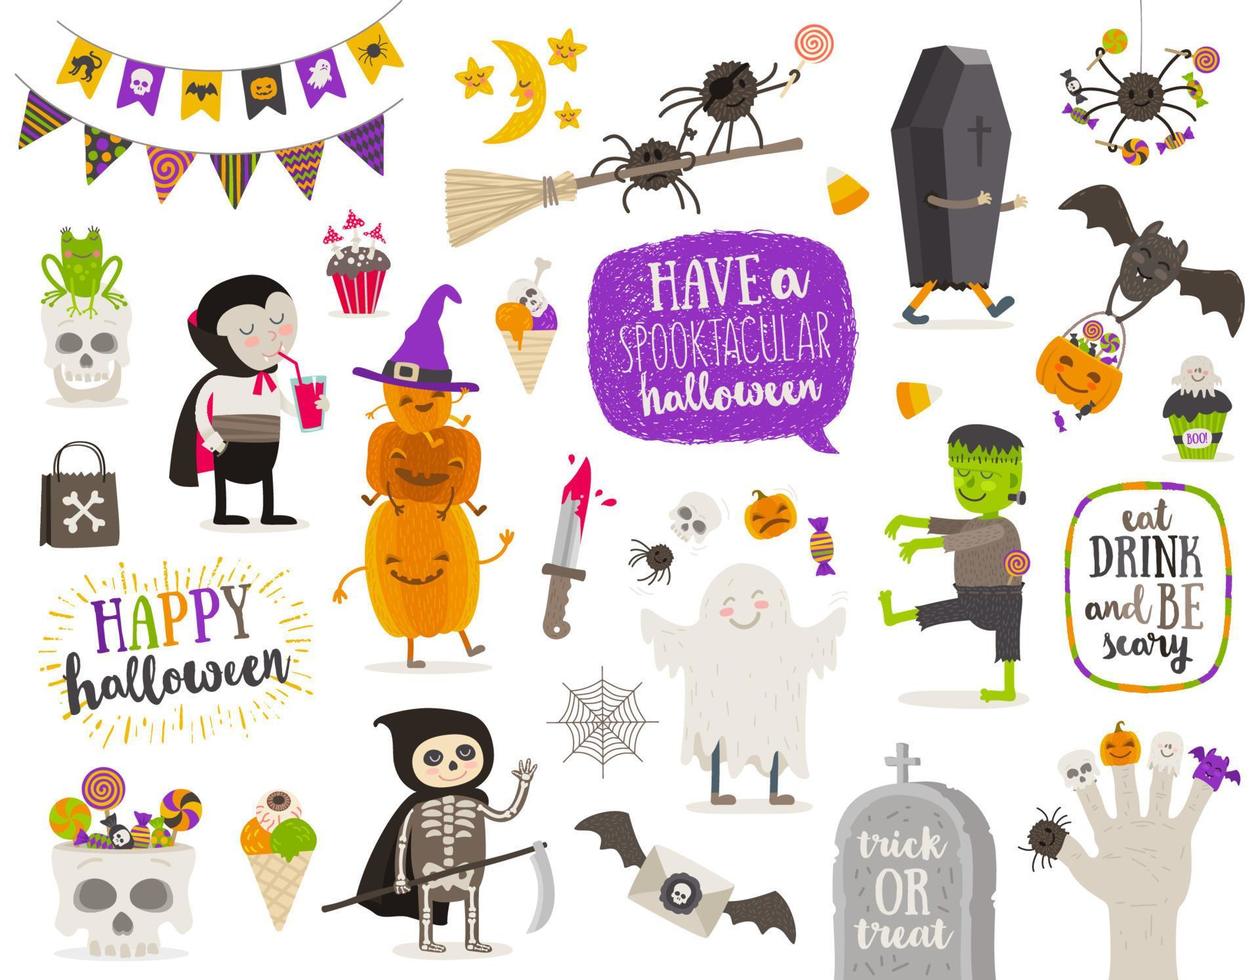 Set of halloween sign, symbol, objects, items and cartoon characters. Vector illustration.